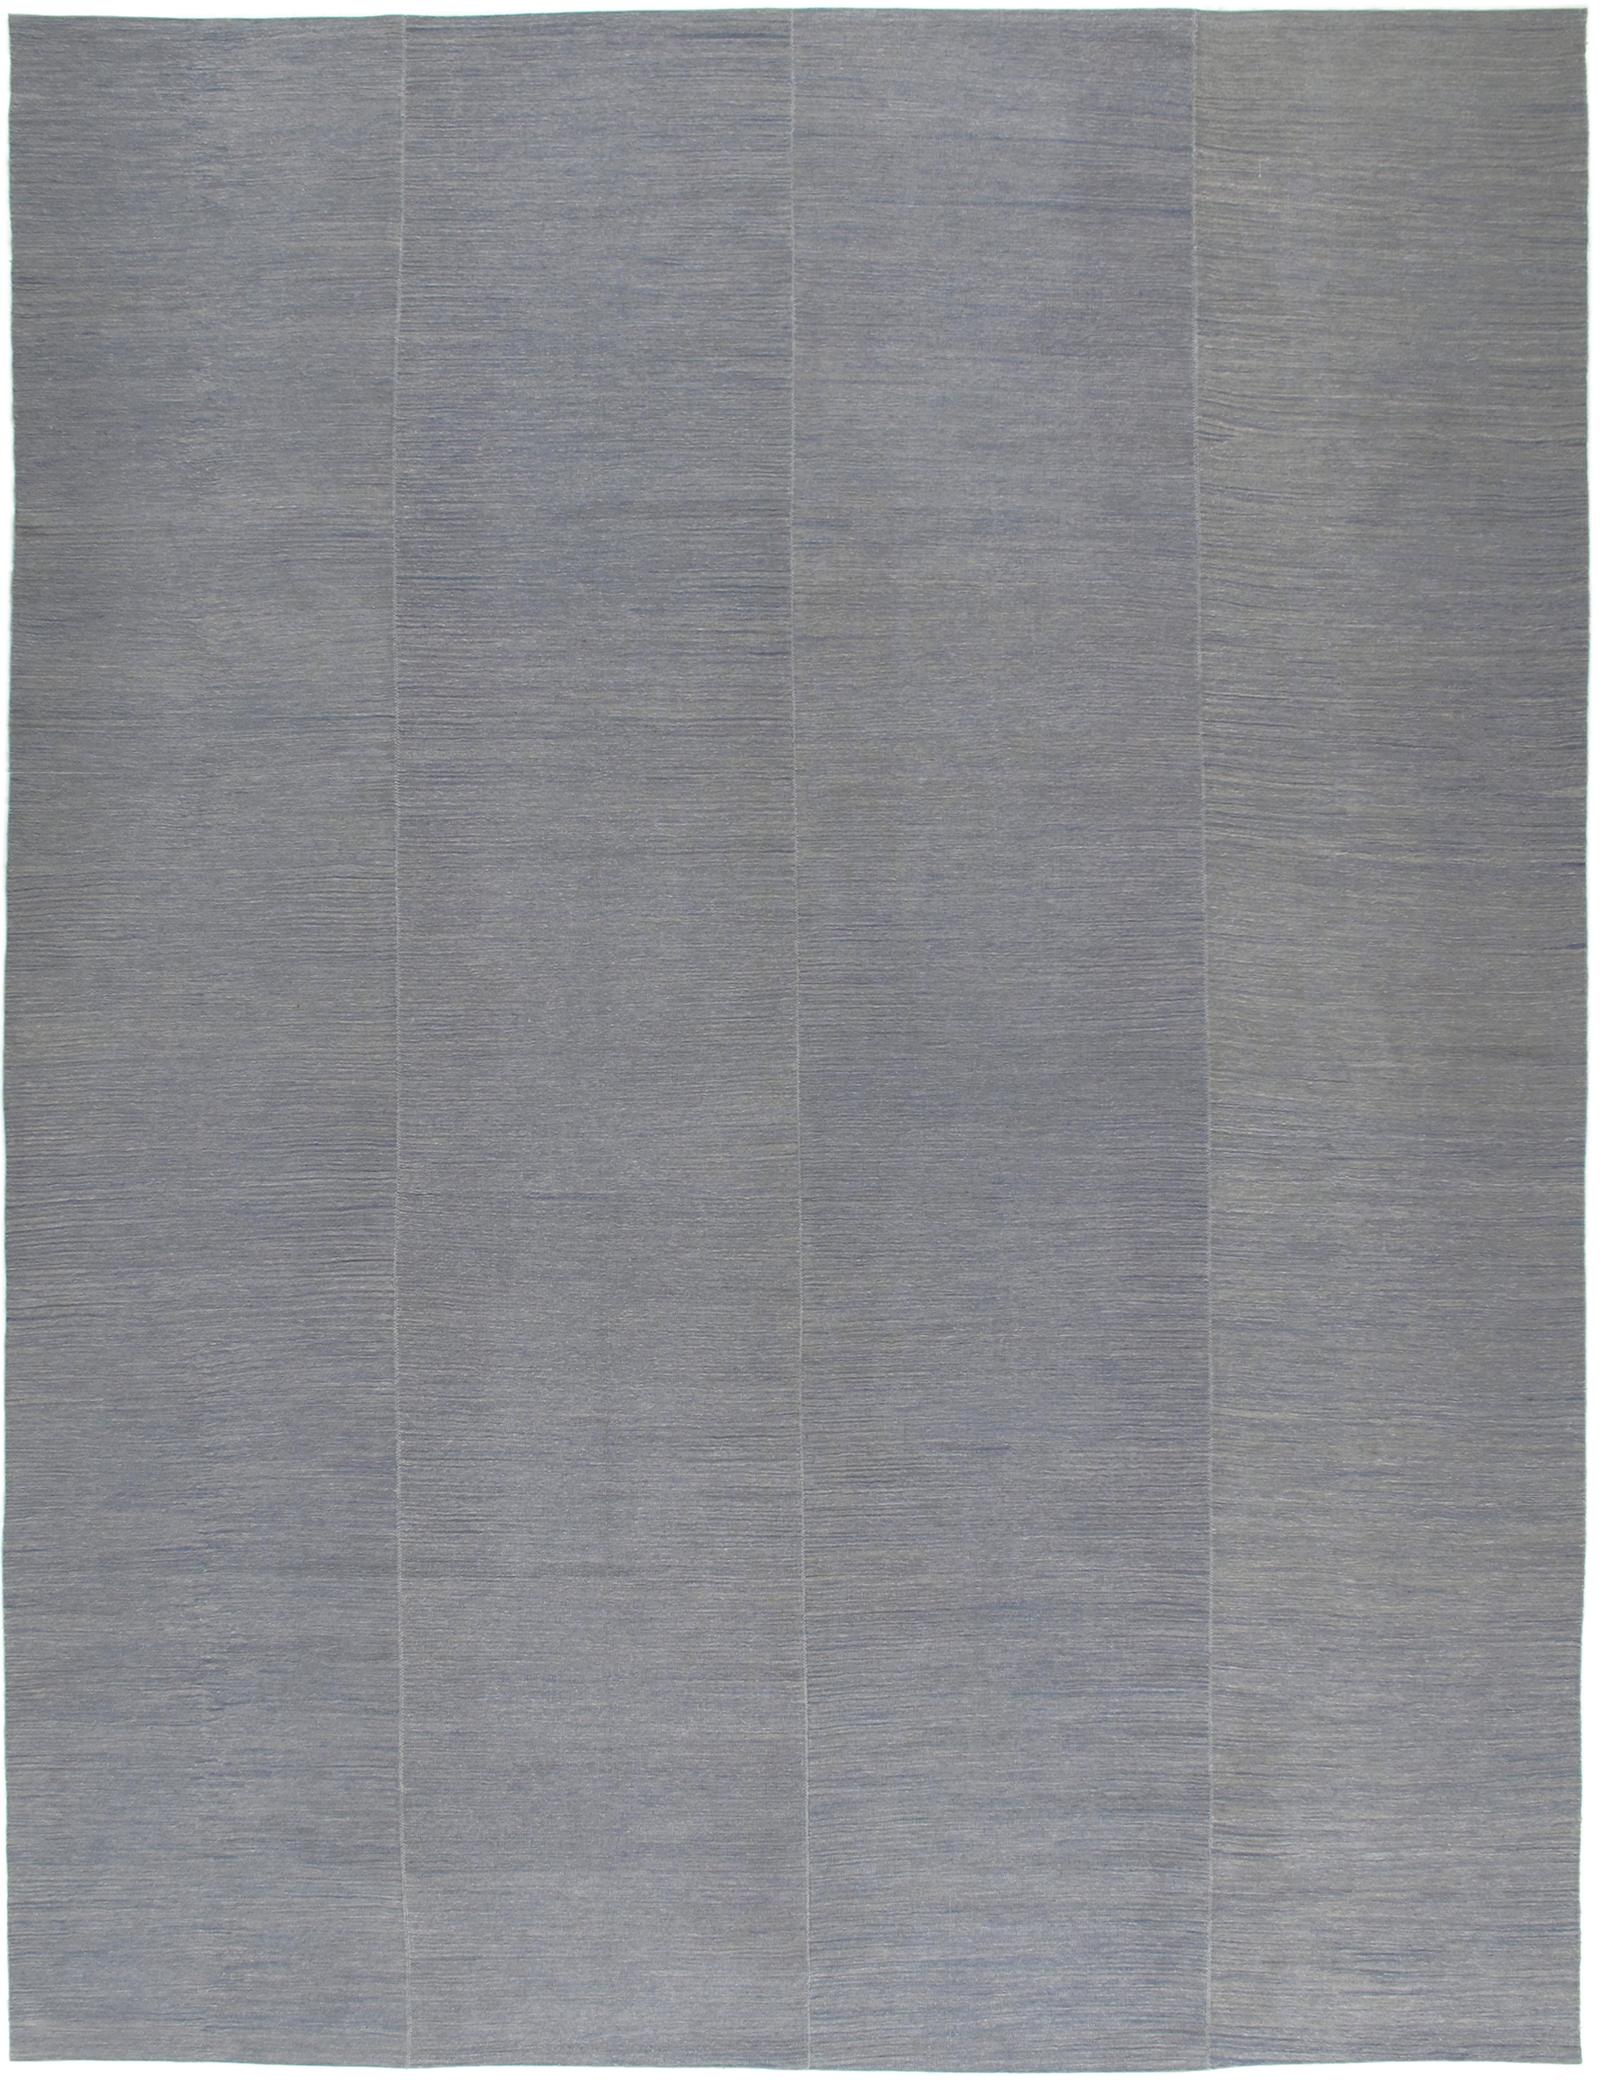 Modern Mazandaran Style Handwoven Flatweave Rug in Blue and Grey In New Condition For Sale In New York, NY